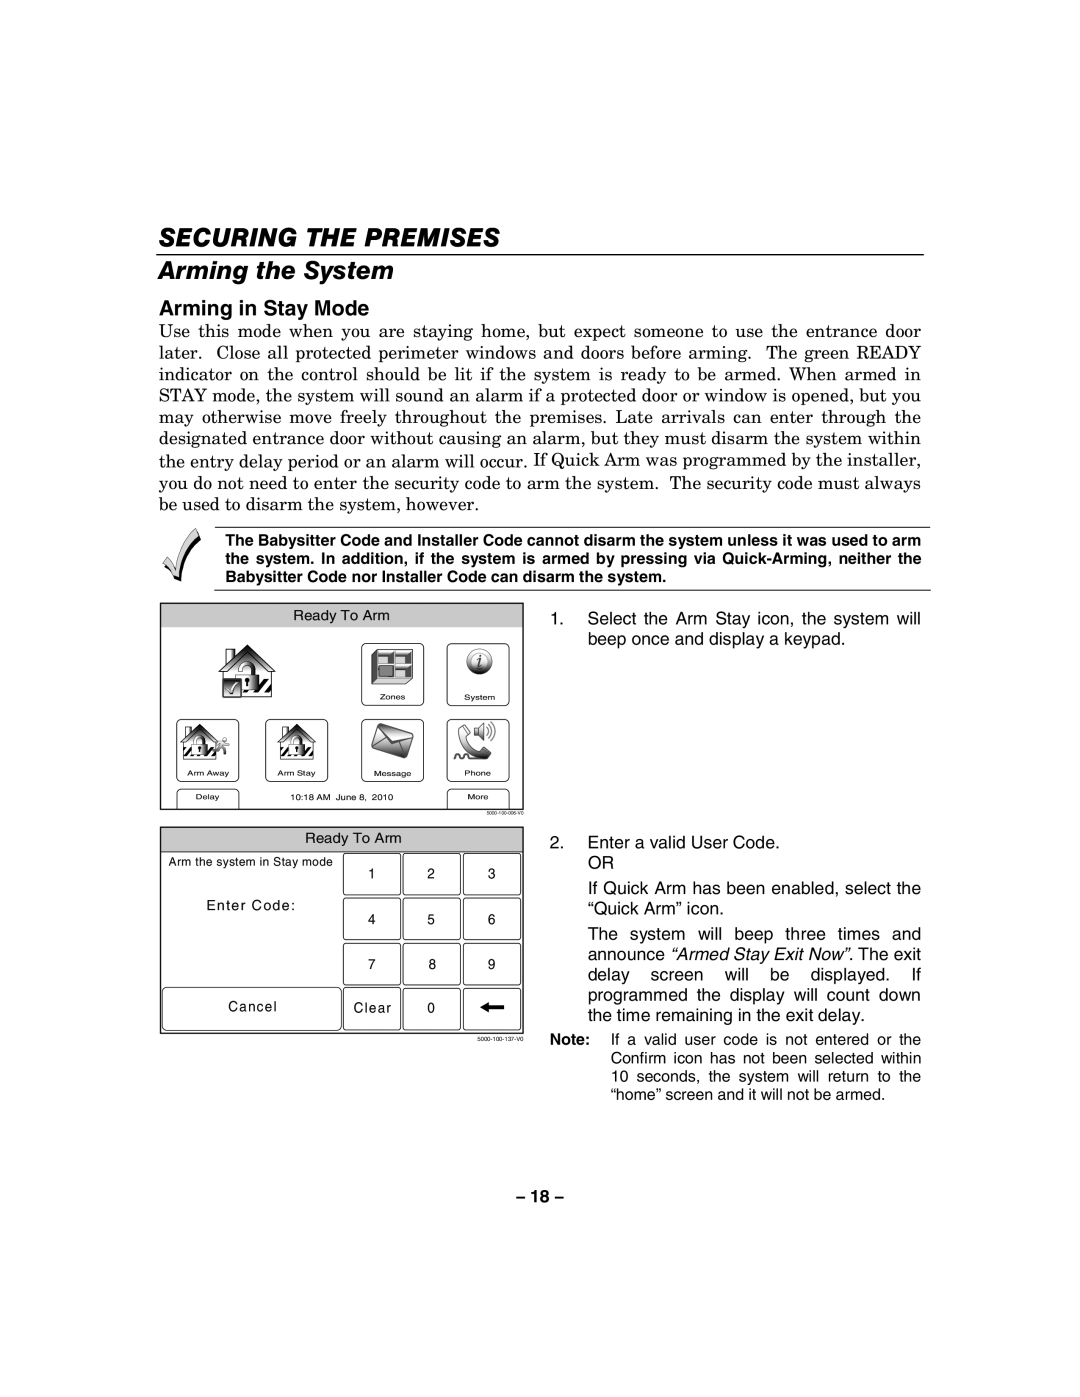 Honeywell 800-06894 manual SECURING THE PREMISES Arming the System, Arming in Stay Mode 